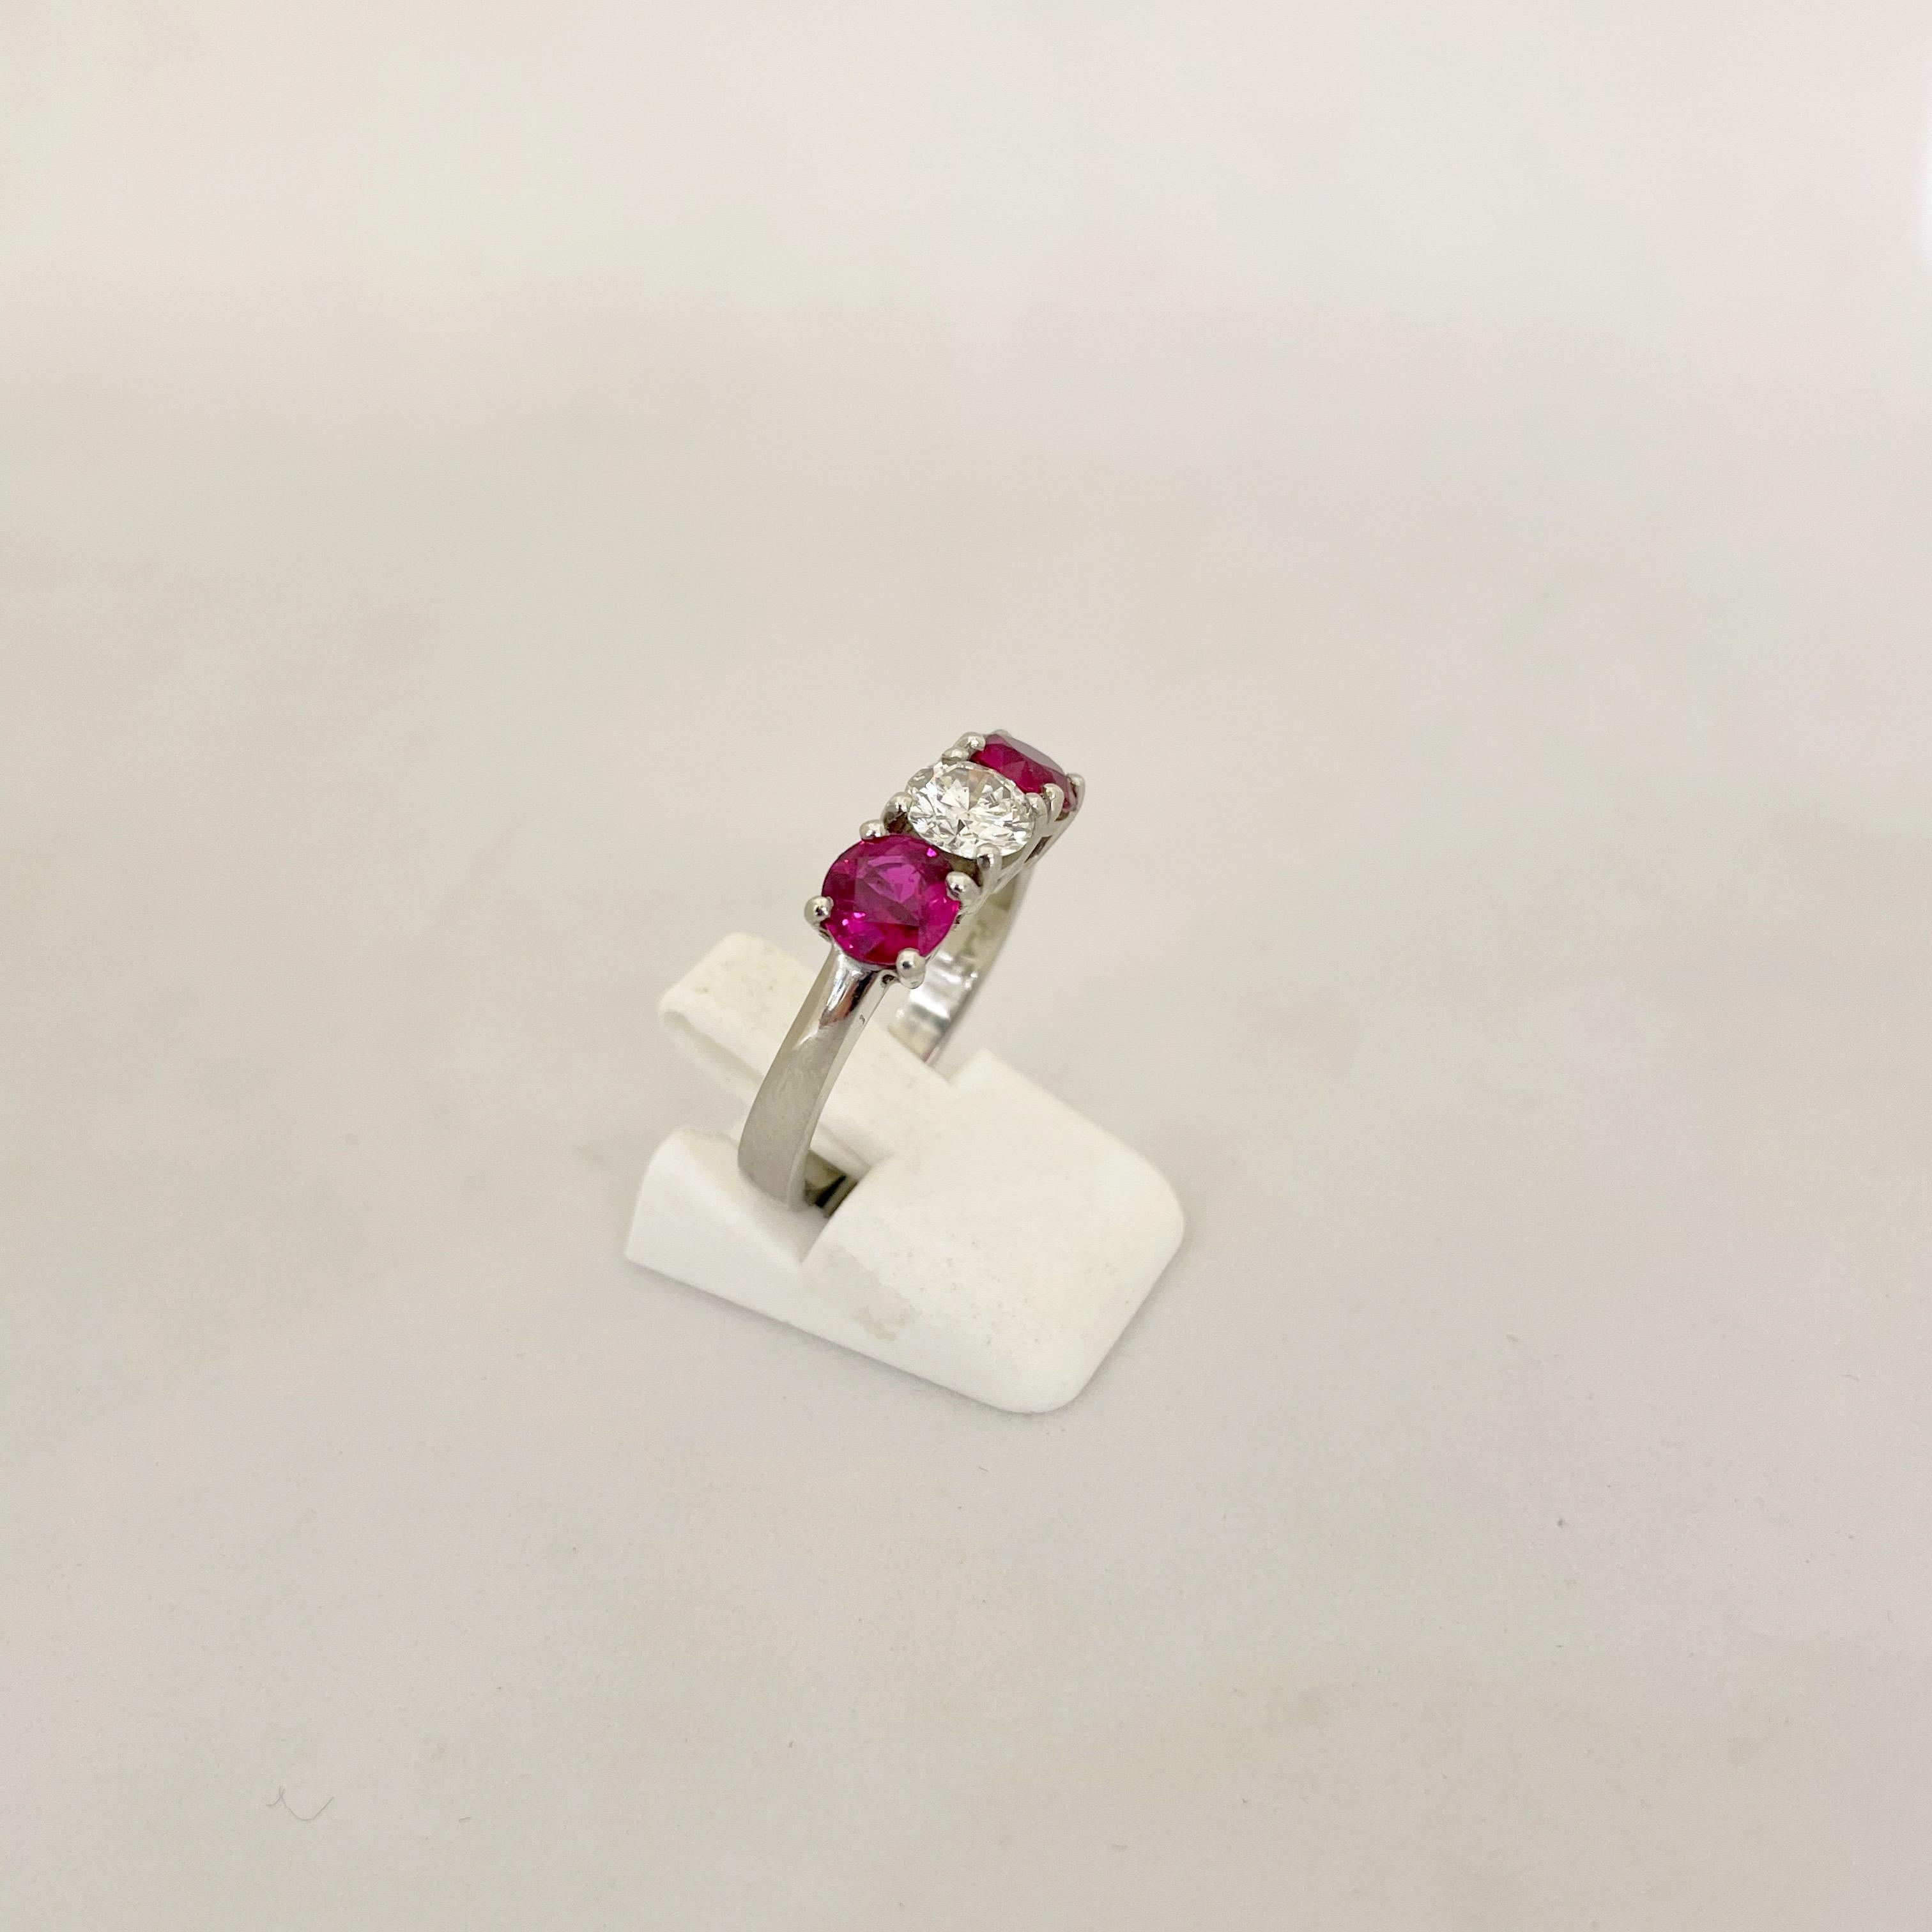 Platinum 3 Stone, 1.63 Carat Ruby and .61 Carat Diamond Ring For Sale 2